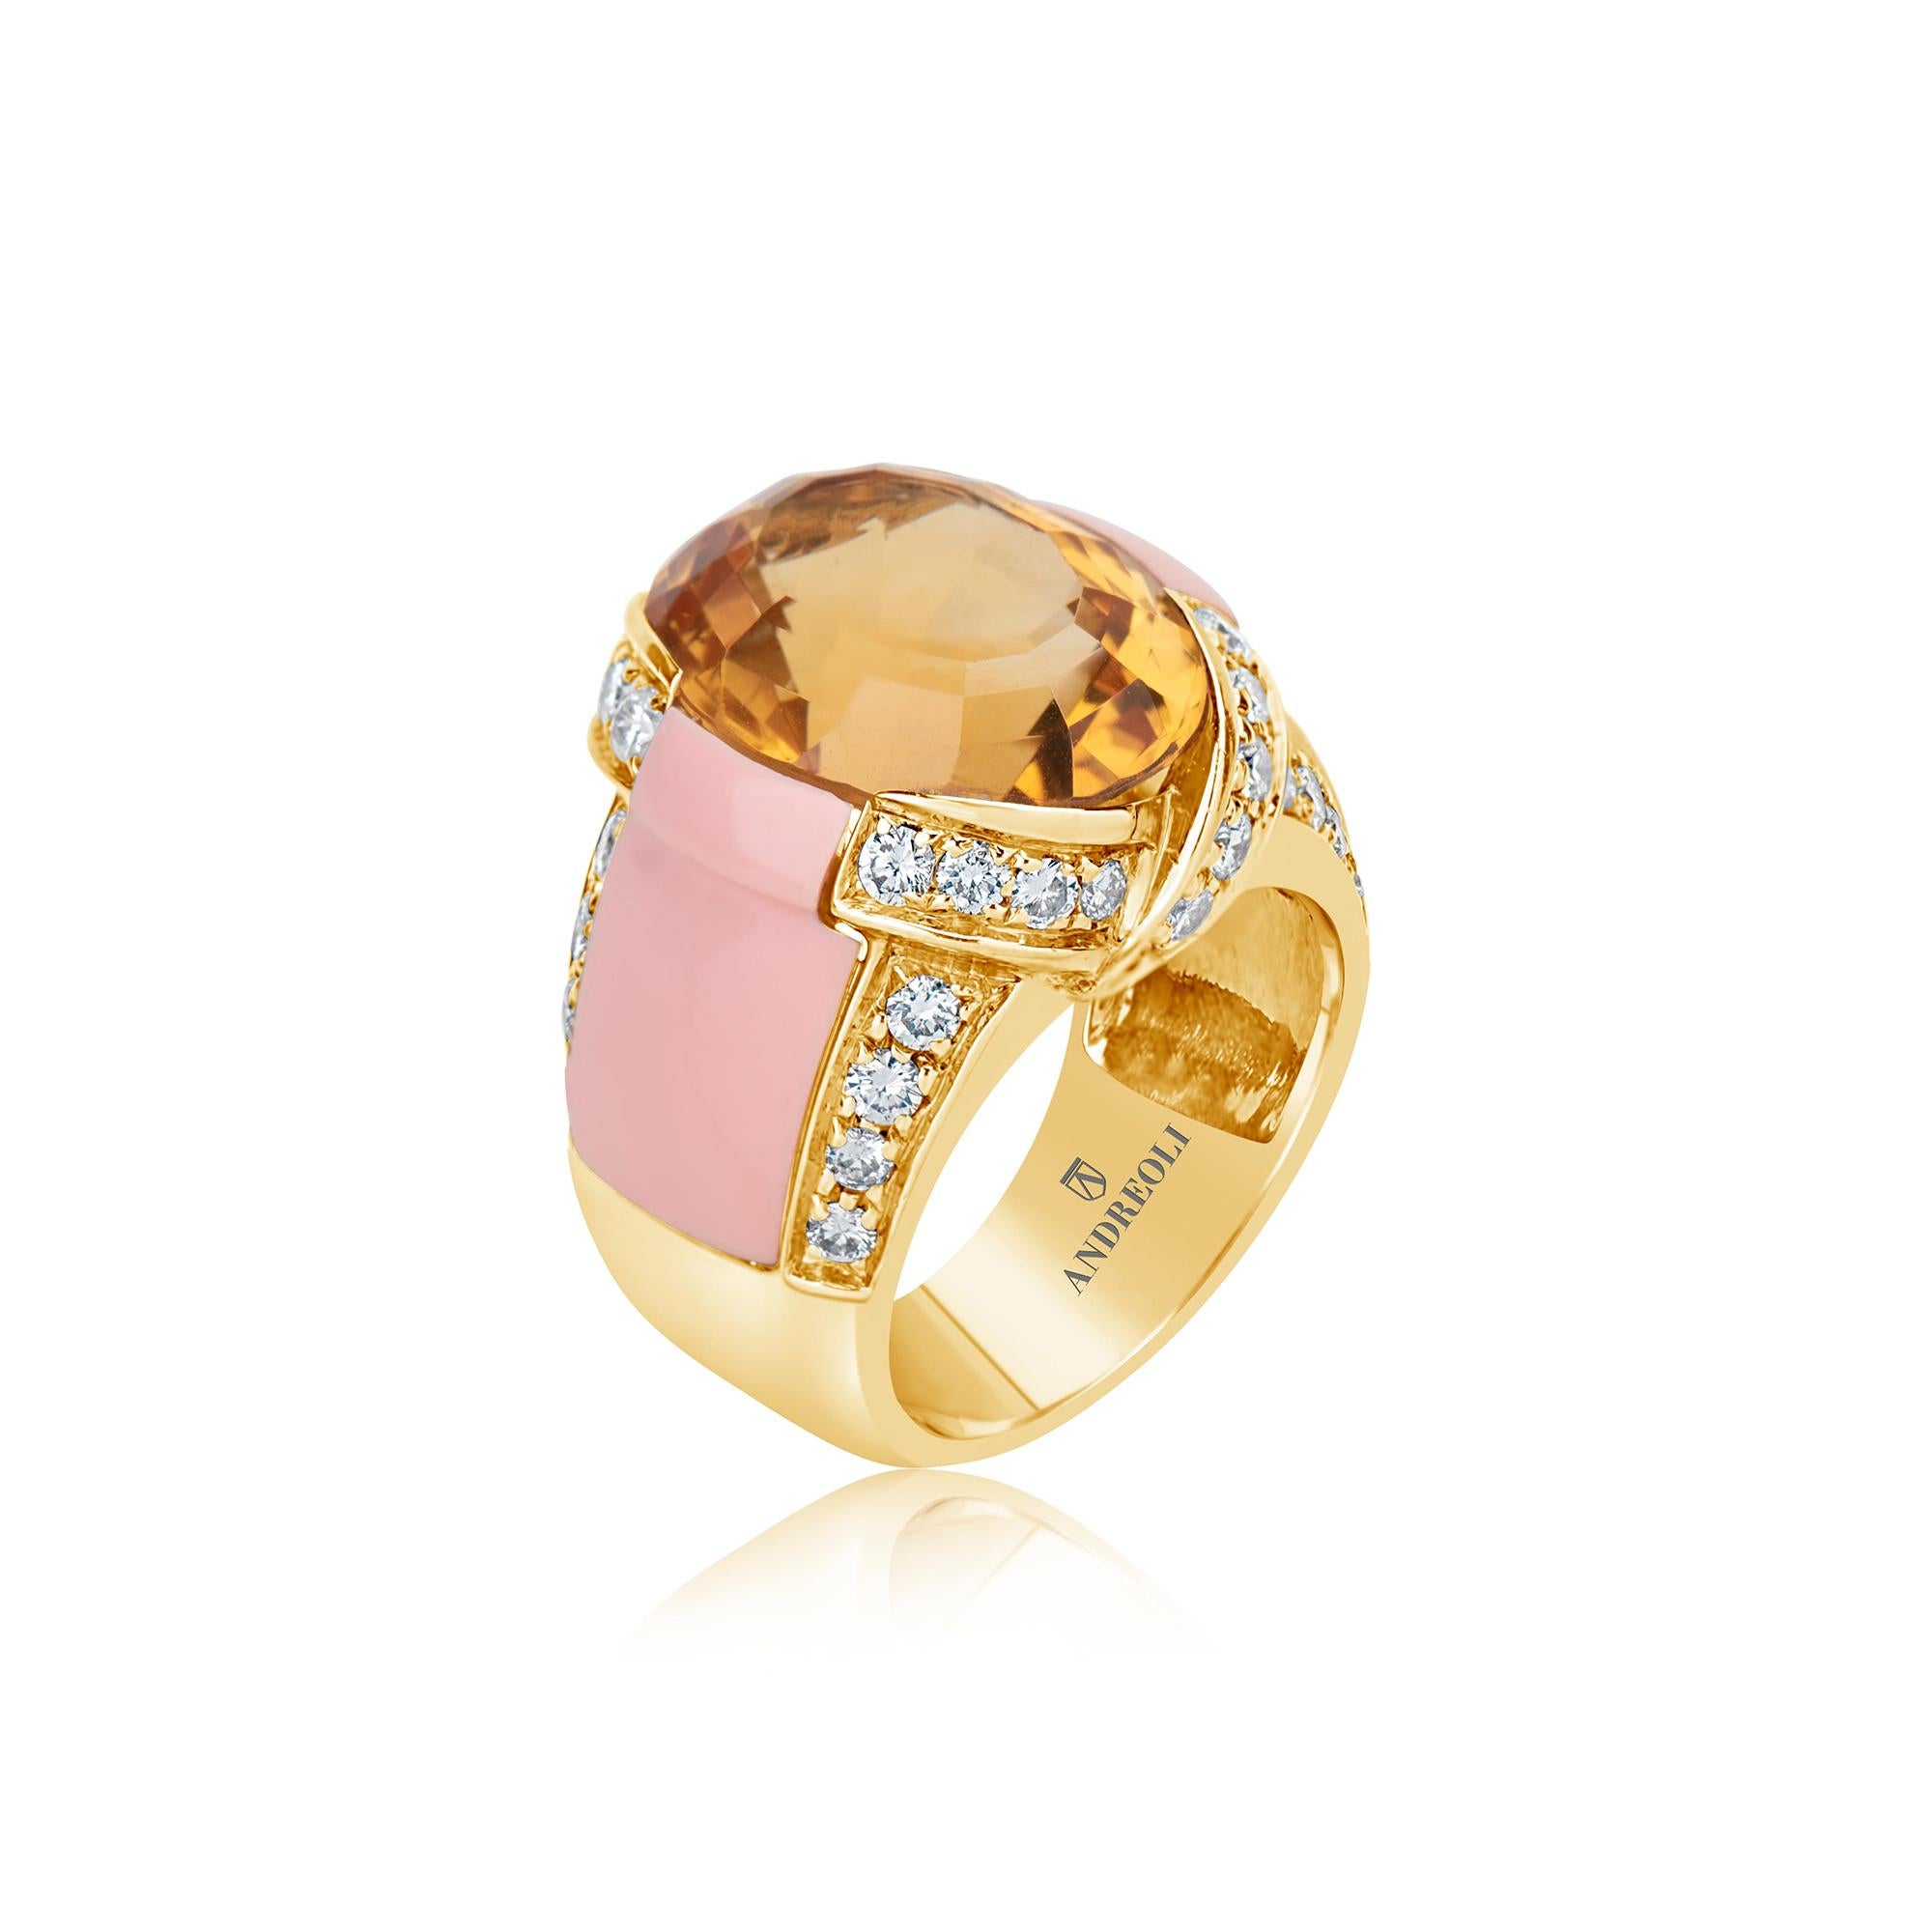 Contemporary Andreoli Diamond Citrine Coral 18 Karat Yellow Gold Ring For Sale